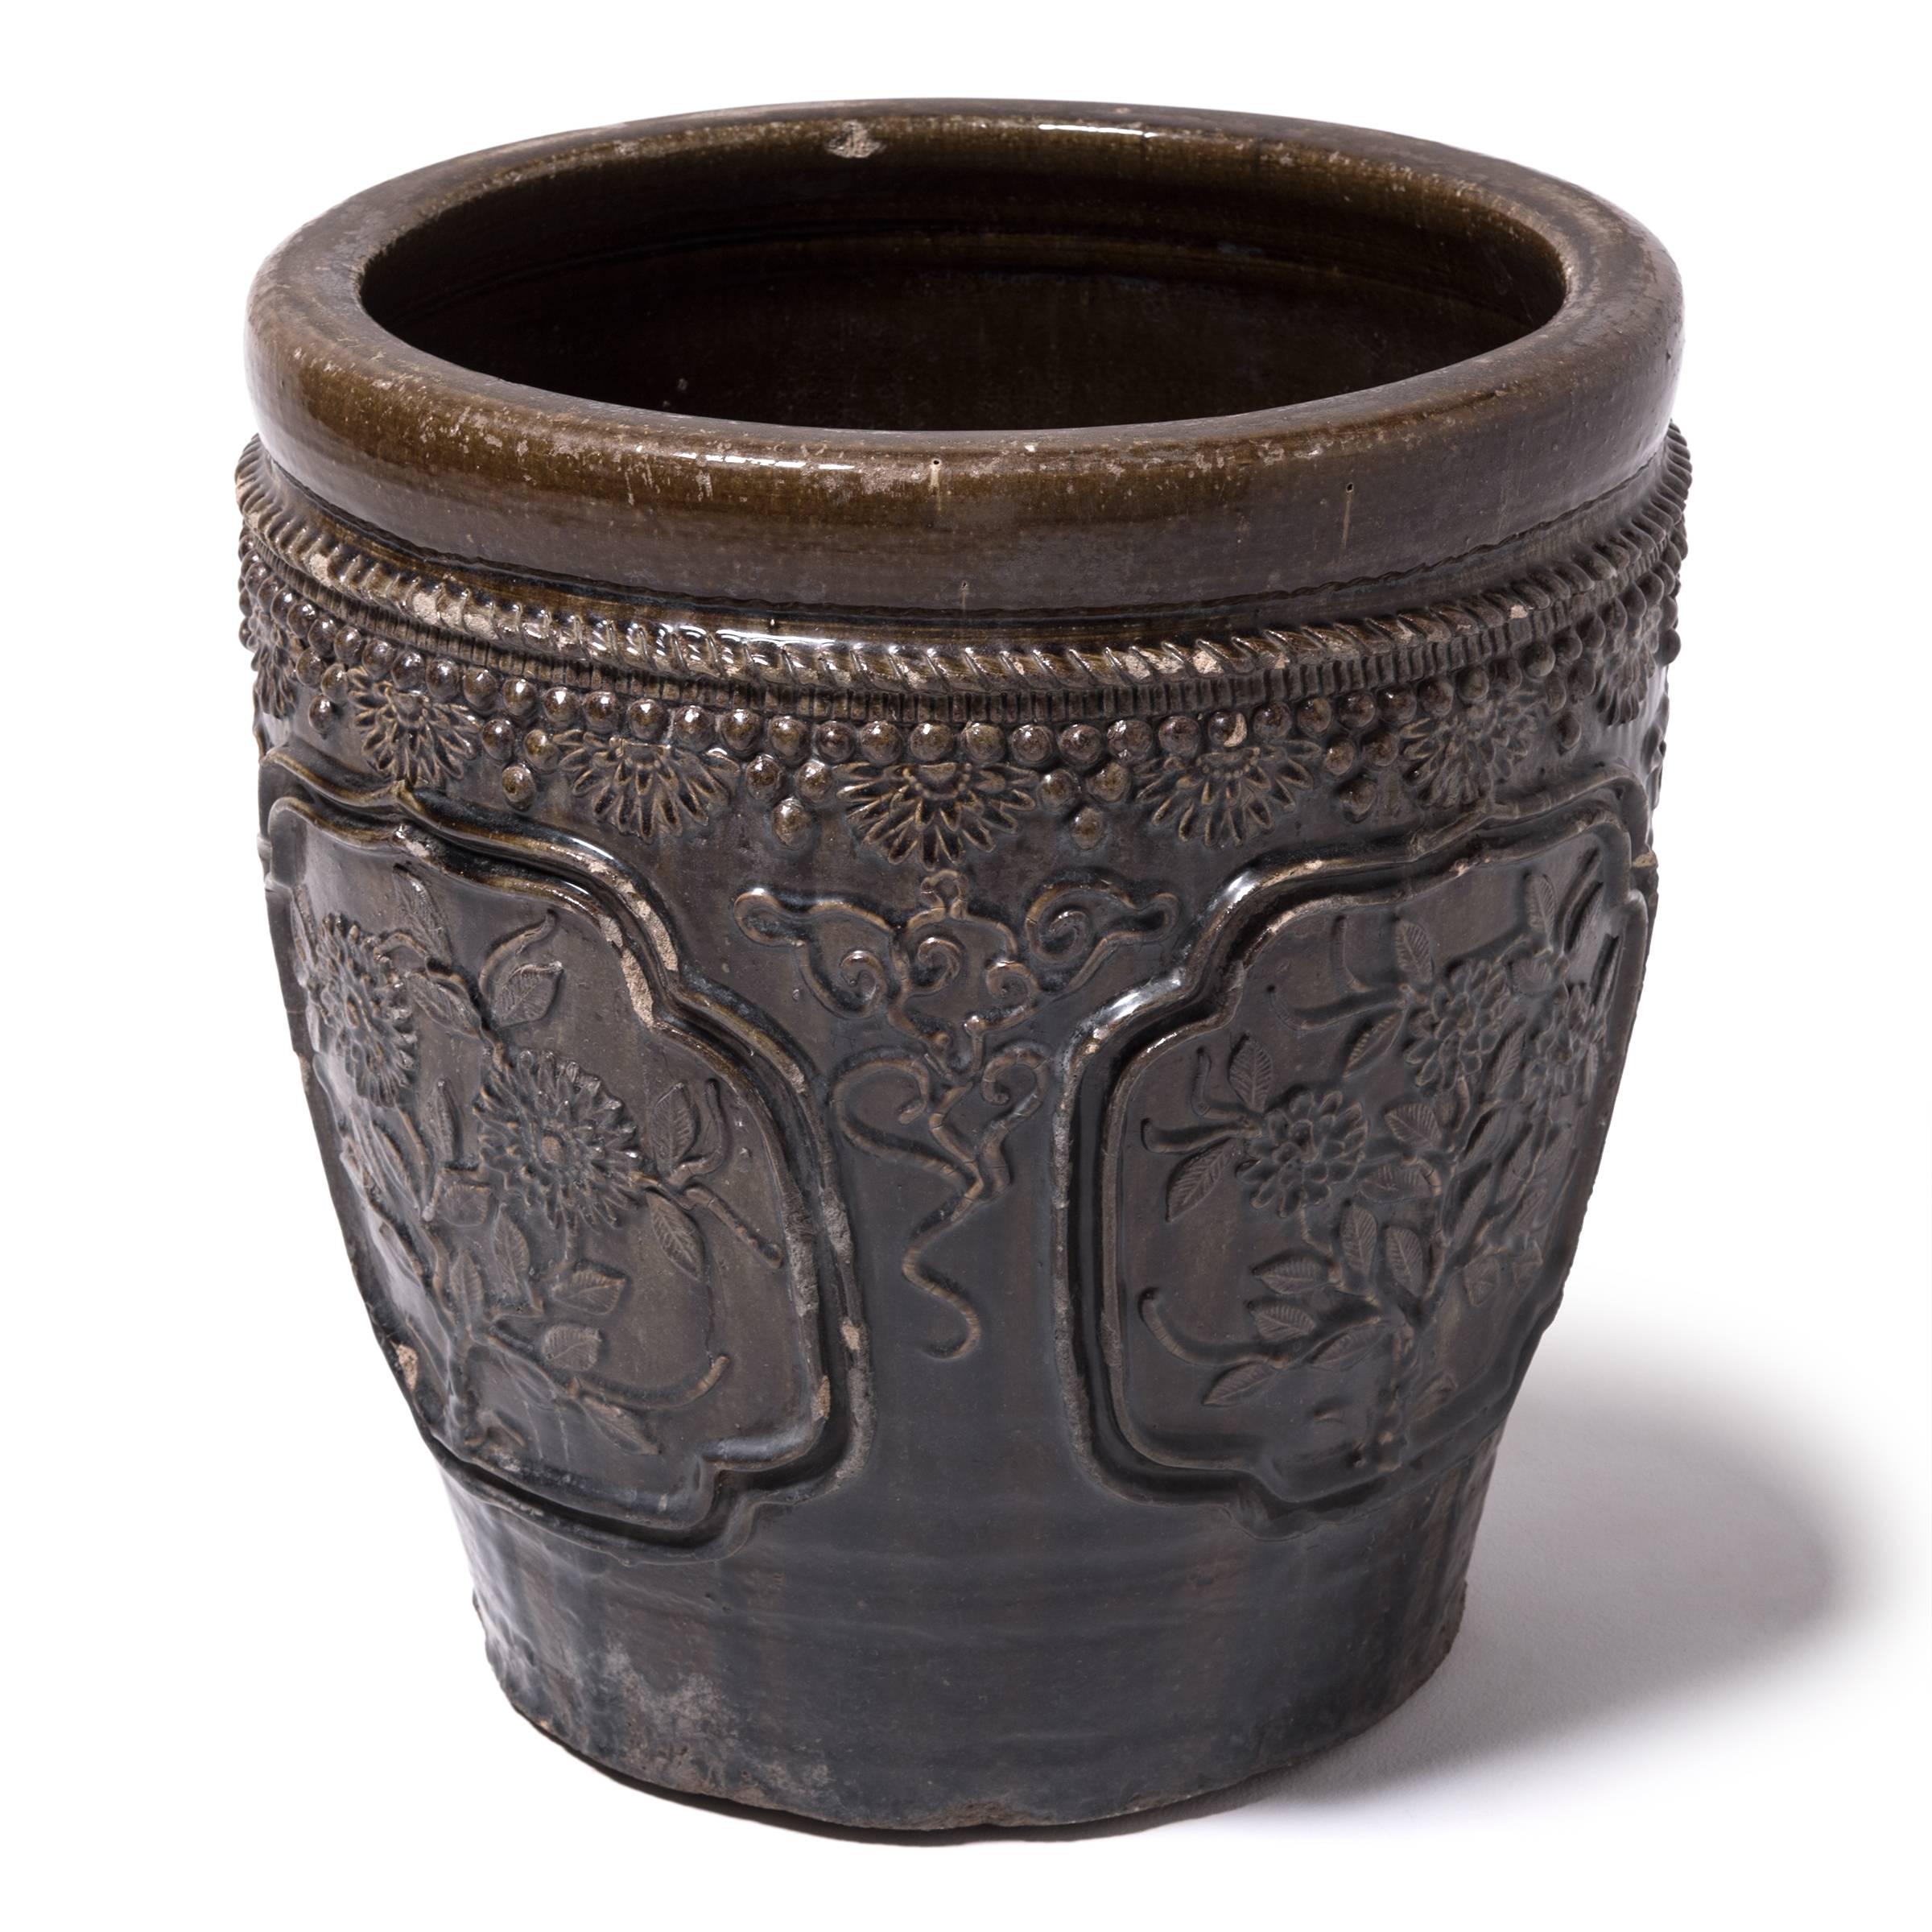 This large glazed jar was handcrafted in Shanxi province over a century ago. Masterfully crafted, the jar is patterned in high relief featuring medallions portraits of blooming flowers and trimmed around the rim with floral, bead and rope-like